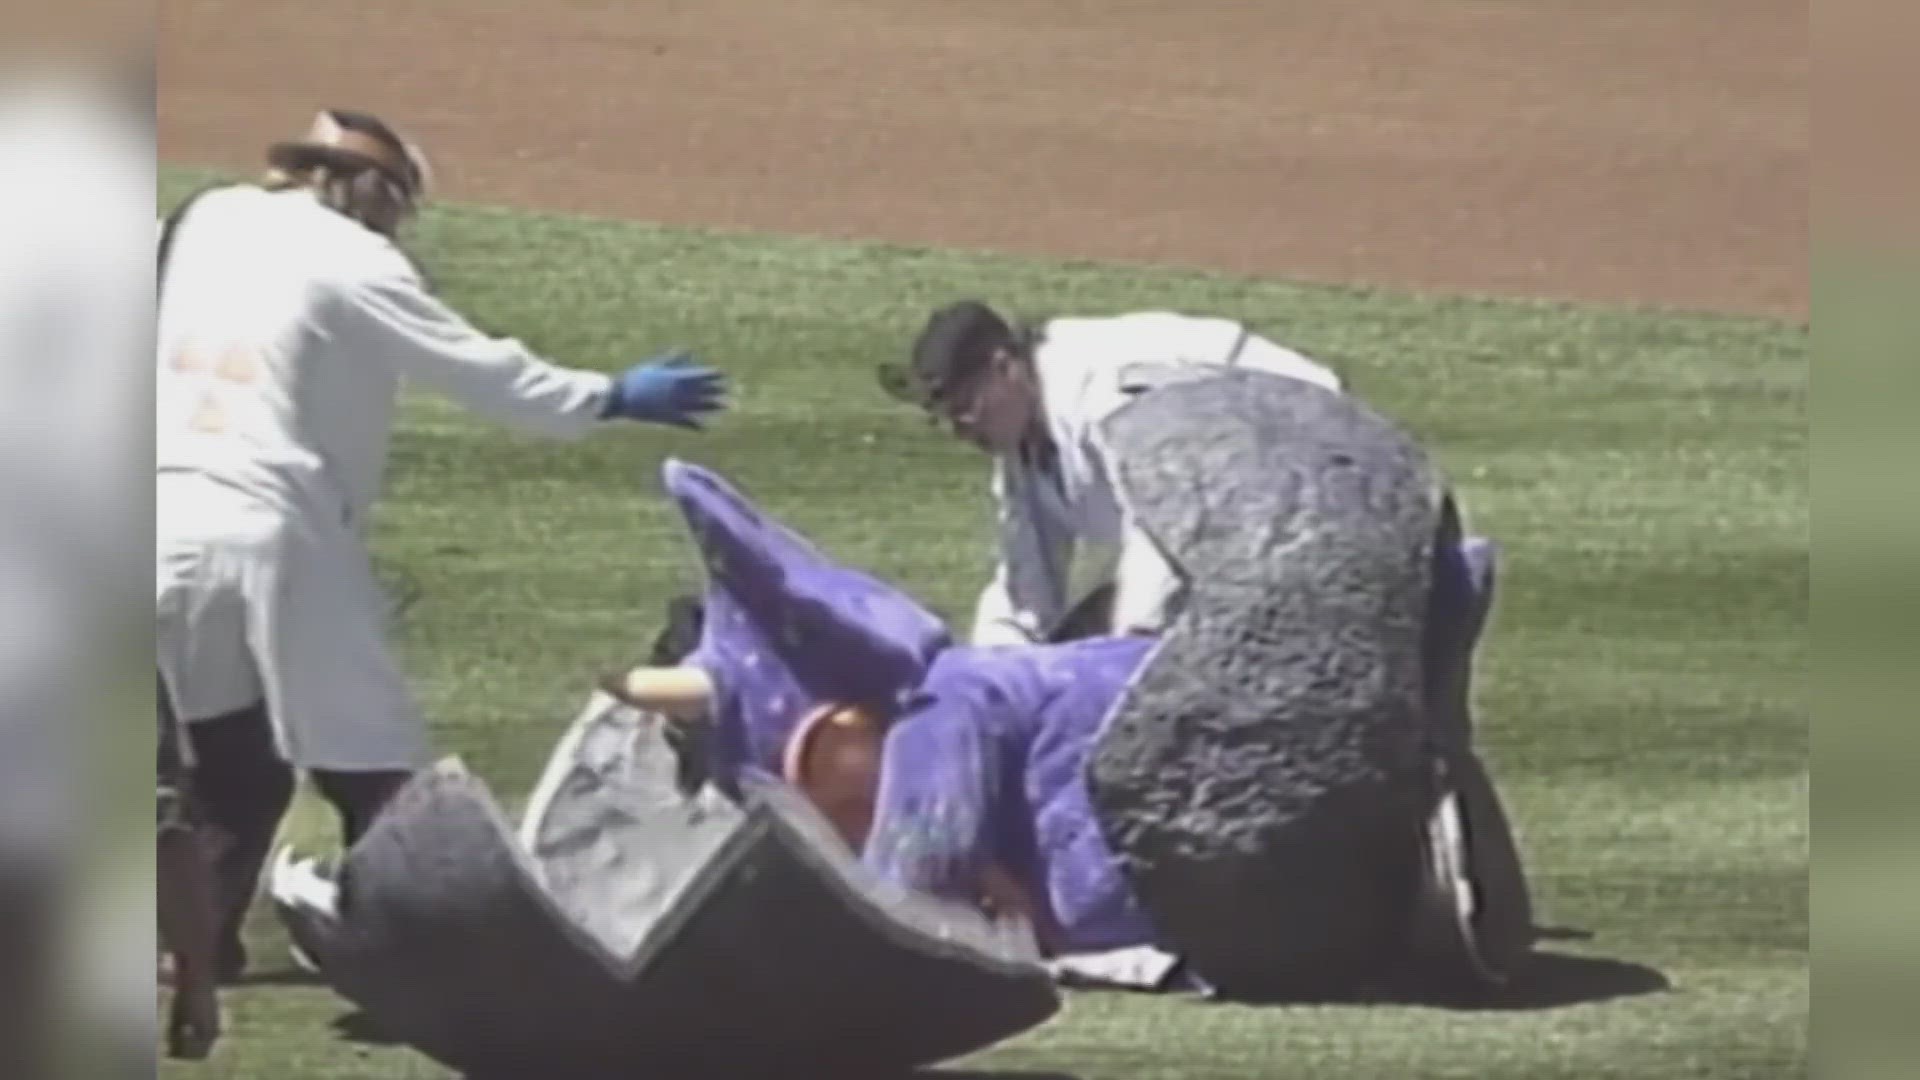 Dinger has been the mascot of the Colorado Rockies since 1994. Some fans may be unaware of the team's decision to go with a dinosaur mascot.